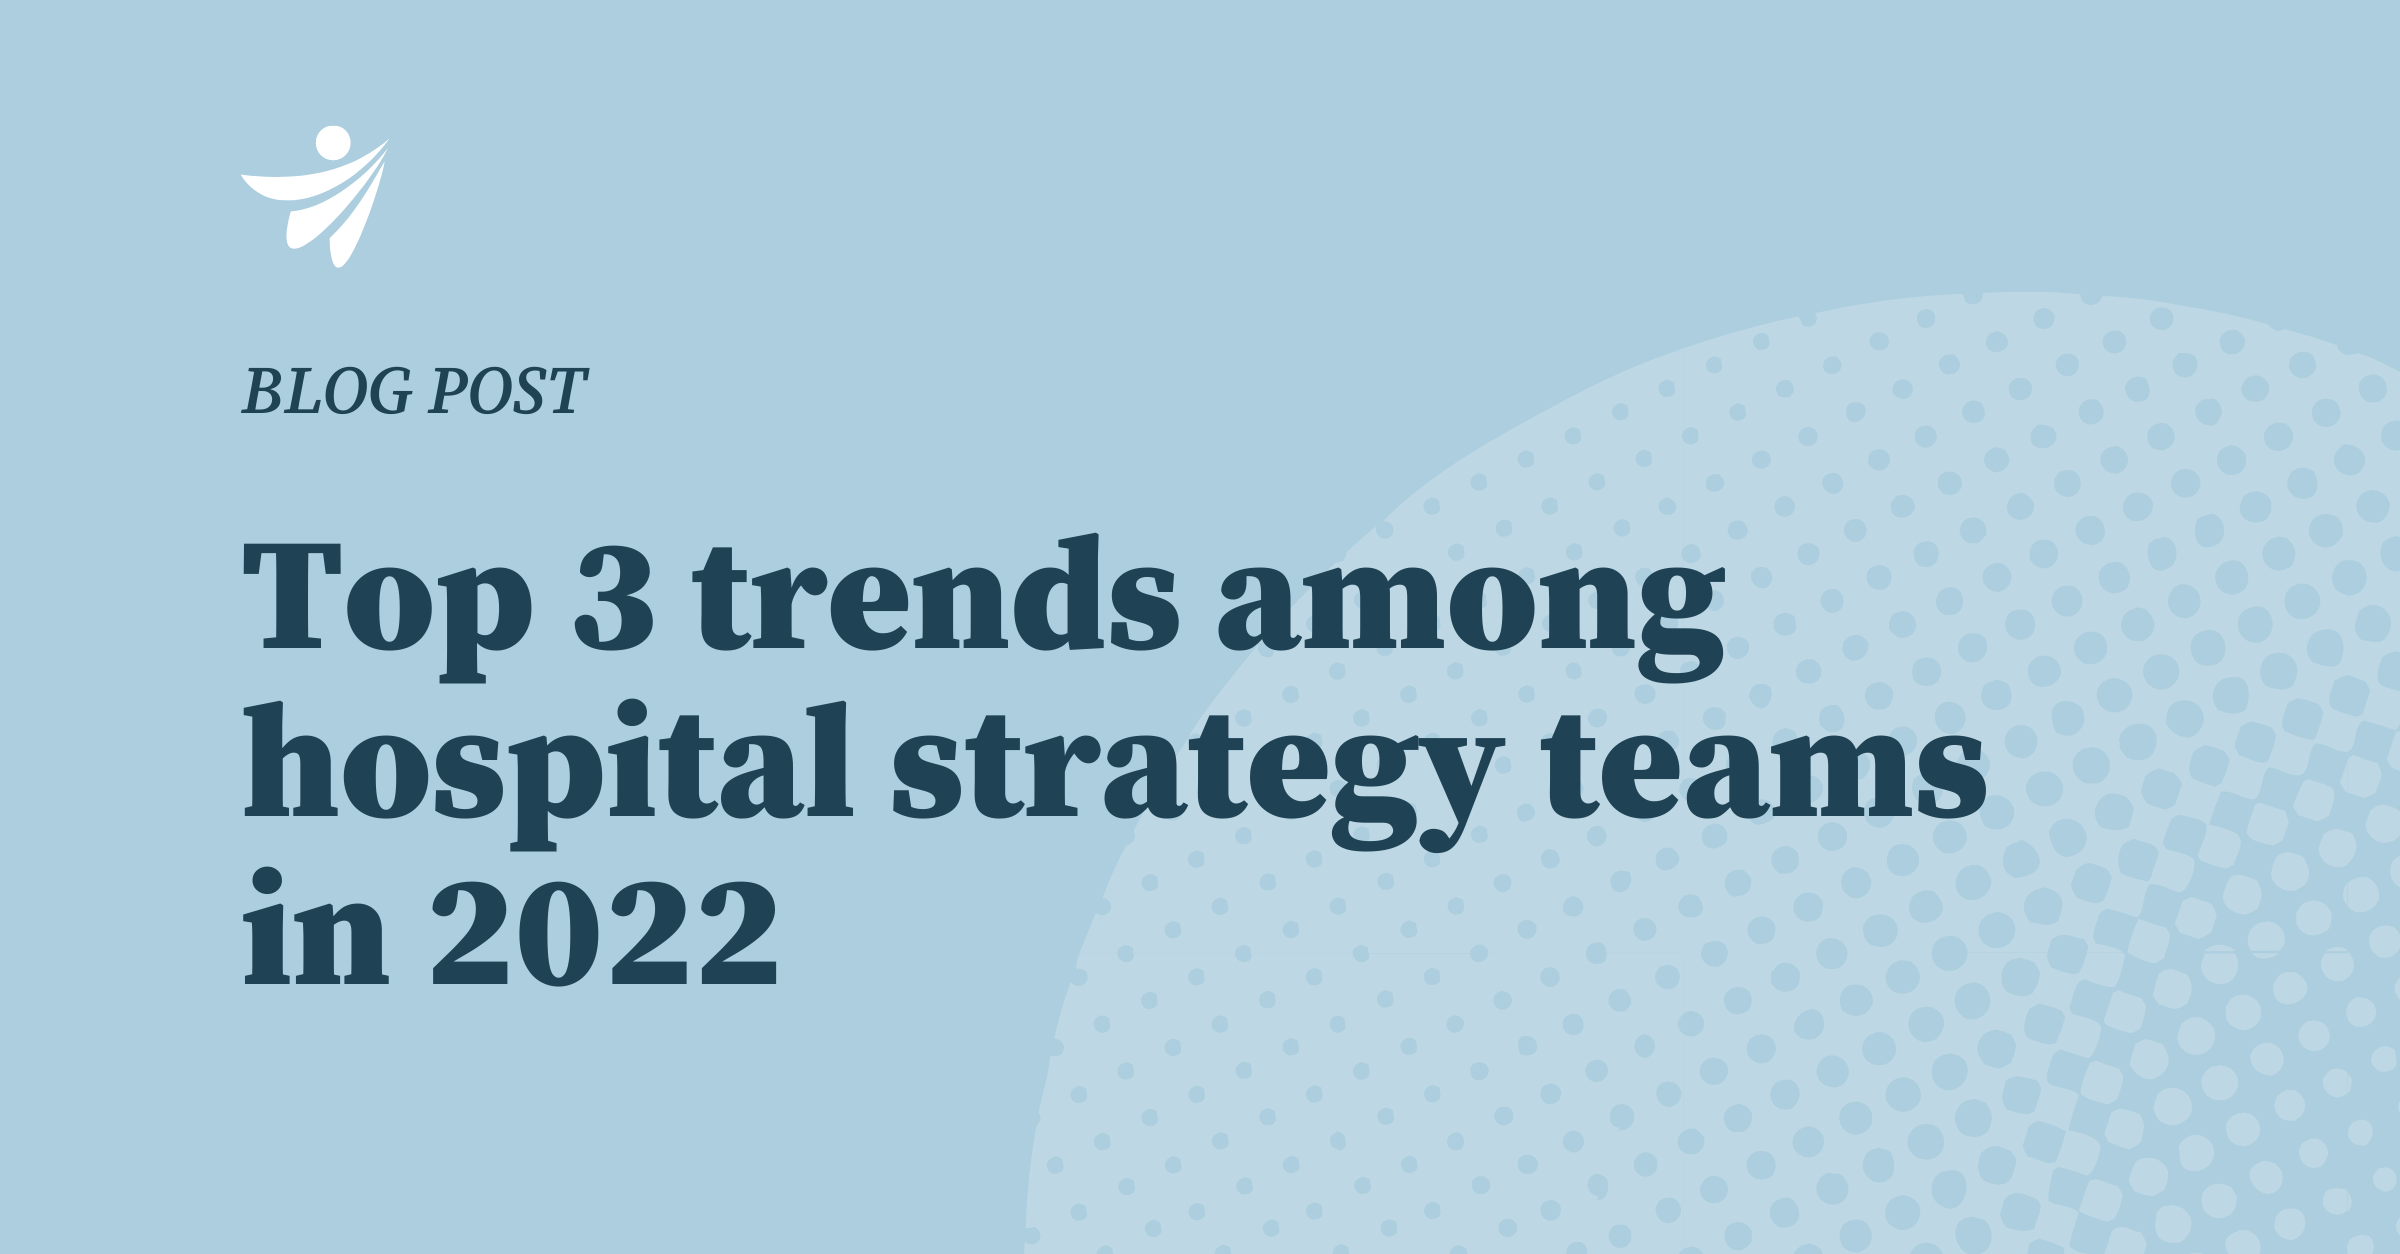 Top 3 trends hospital strategy teams 2022